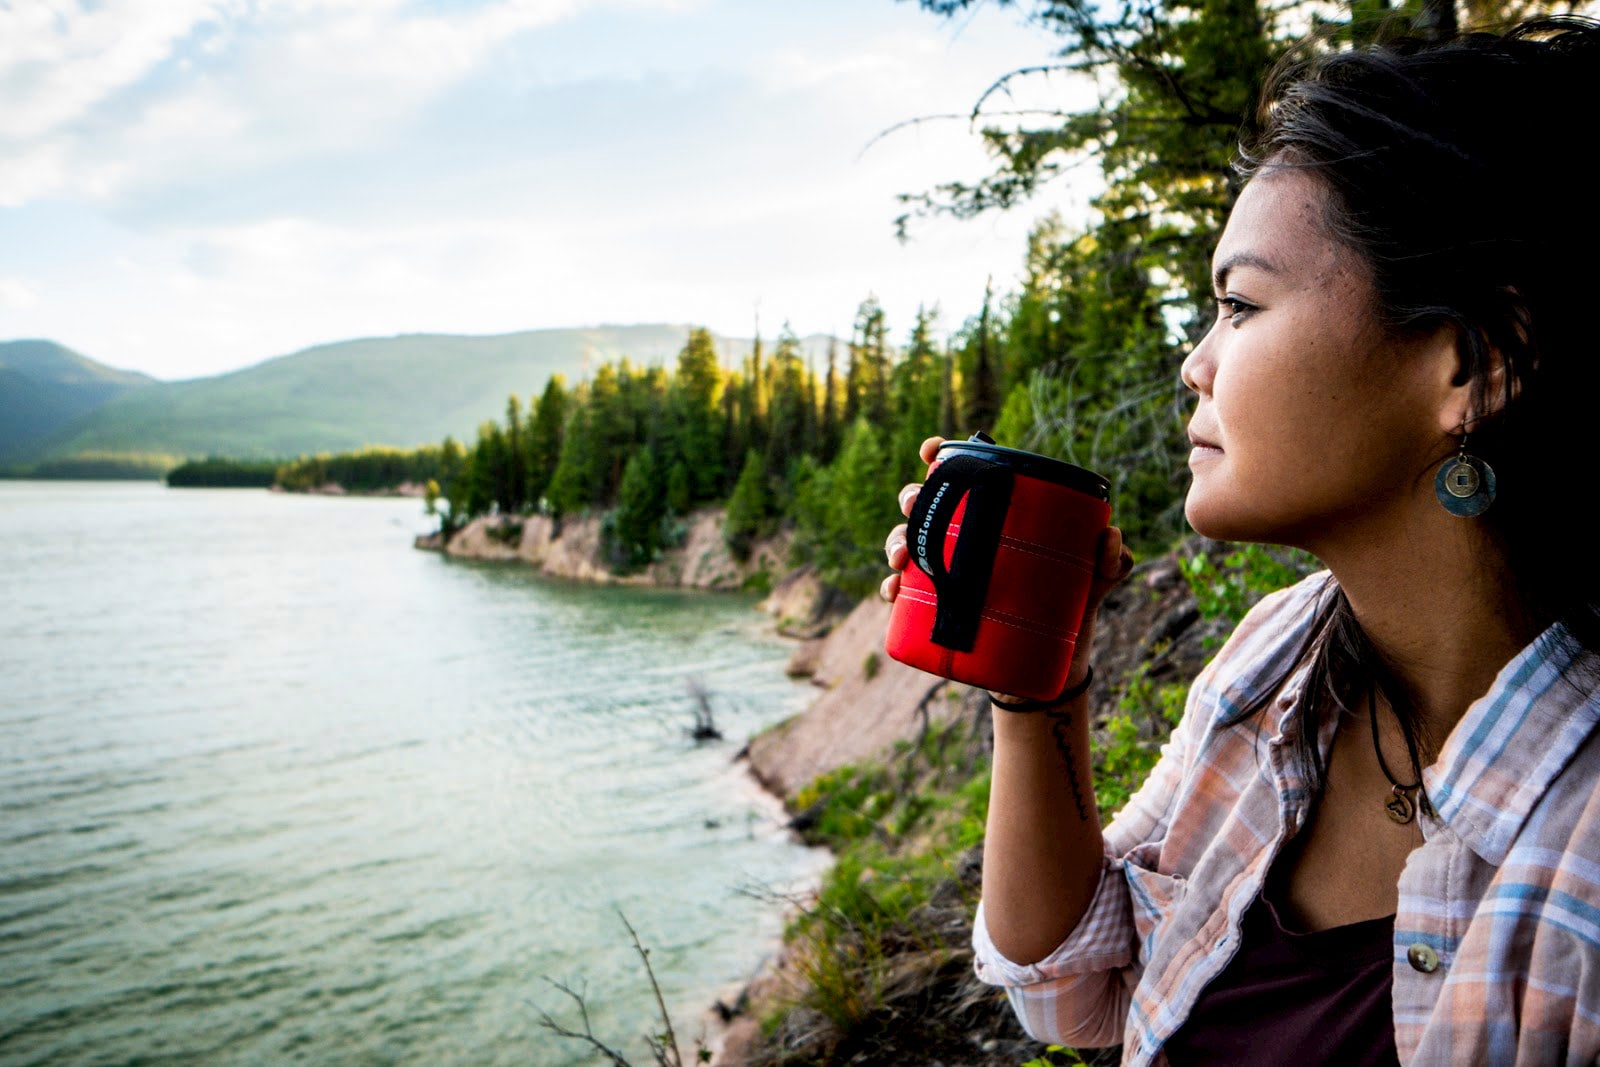 Women drinking out of red mug on the side of a lake.